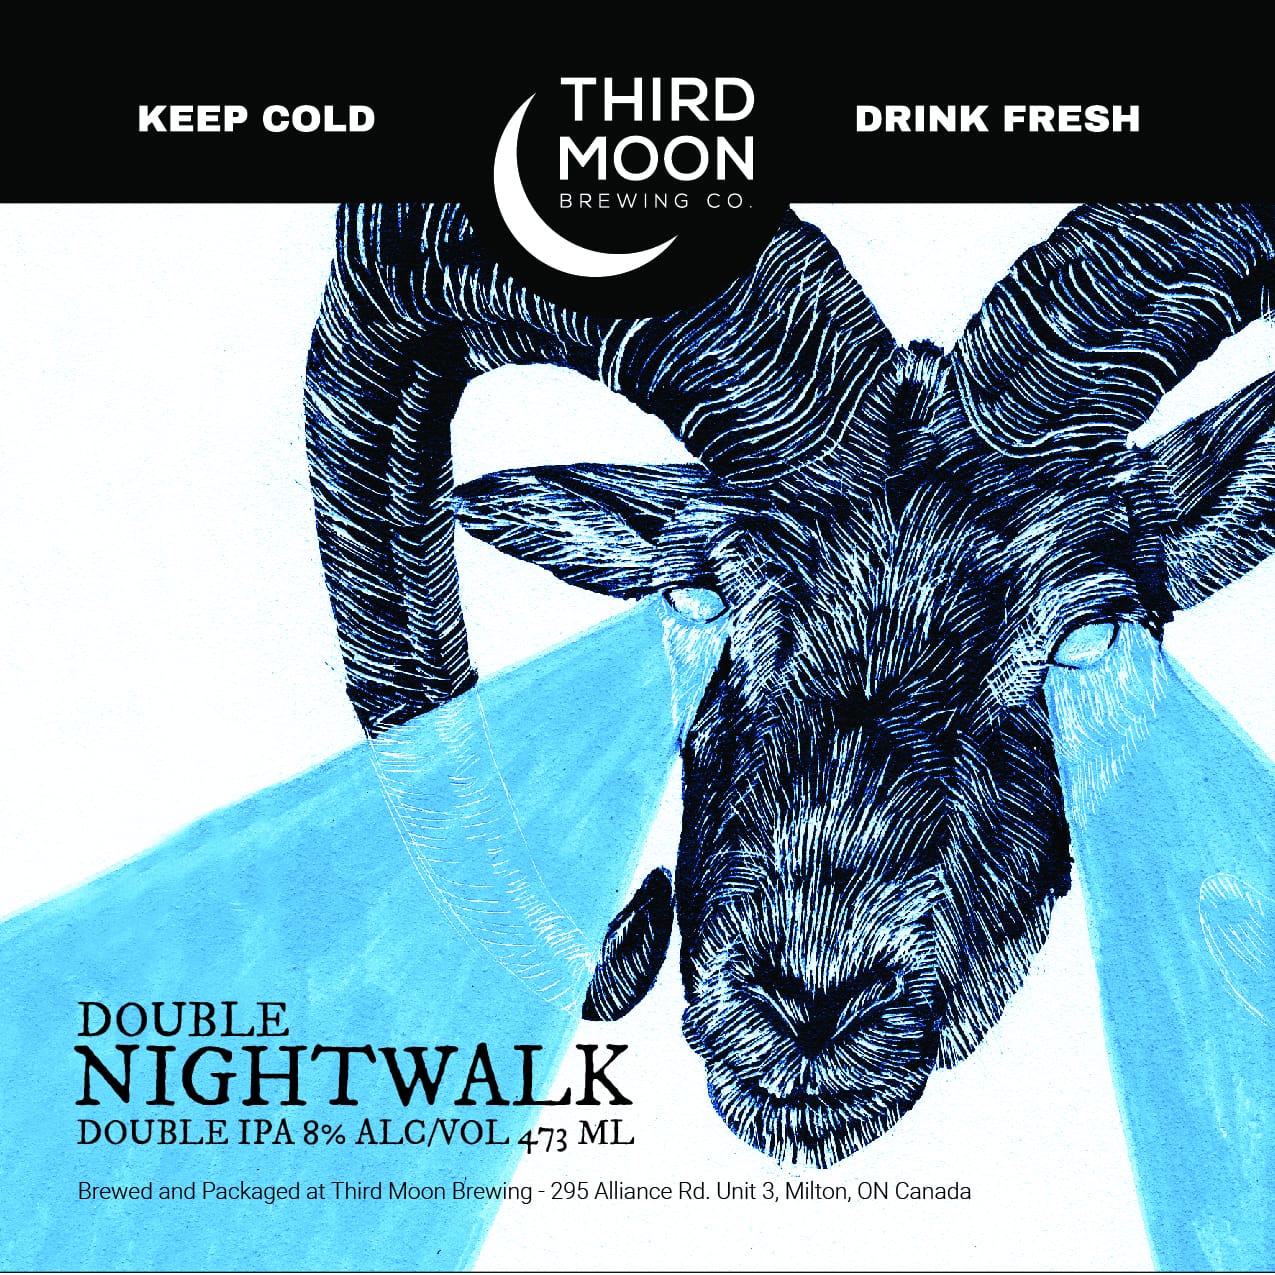 Double IPA - 4-pk of "Double Nightwalk" tall cans